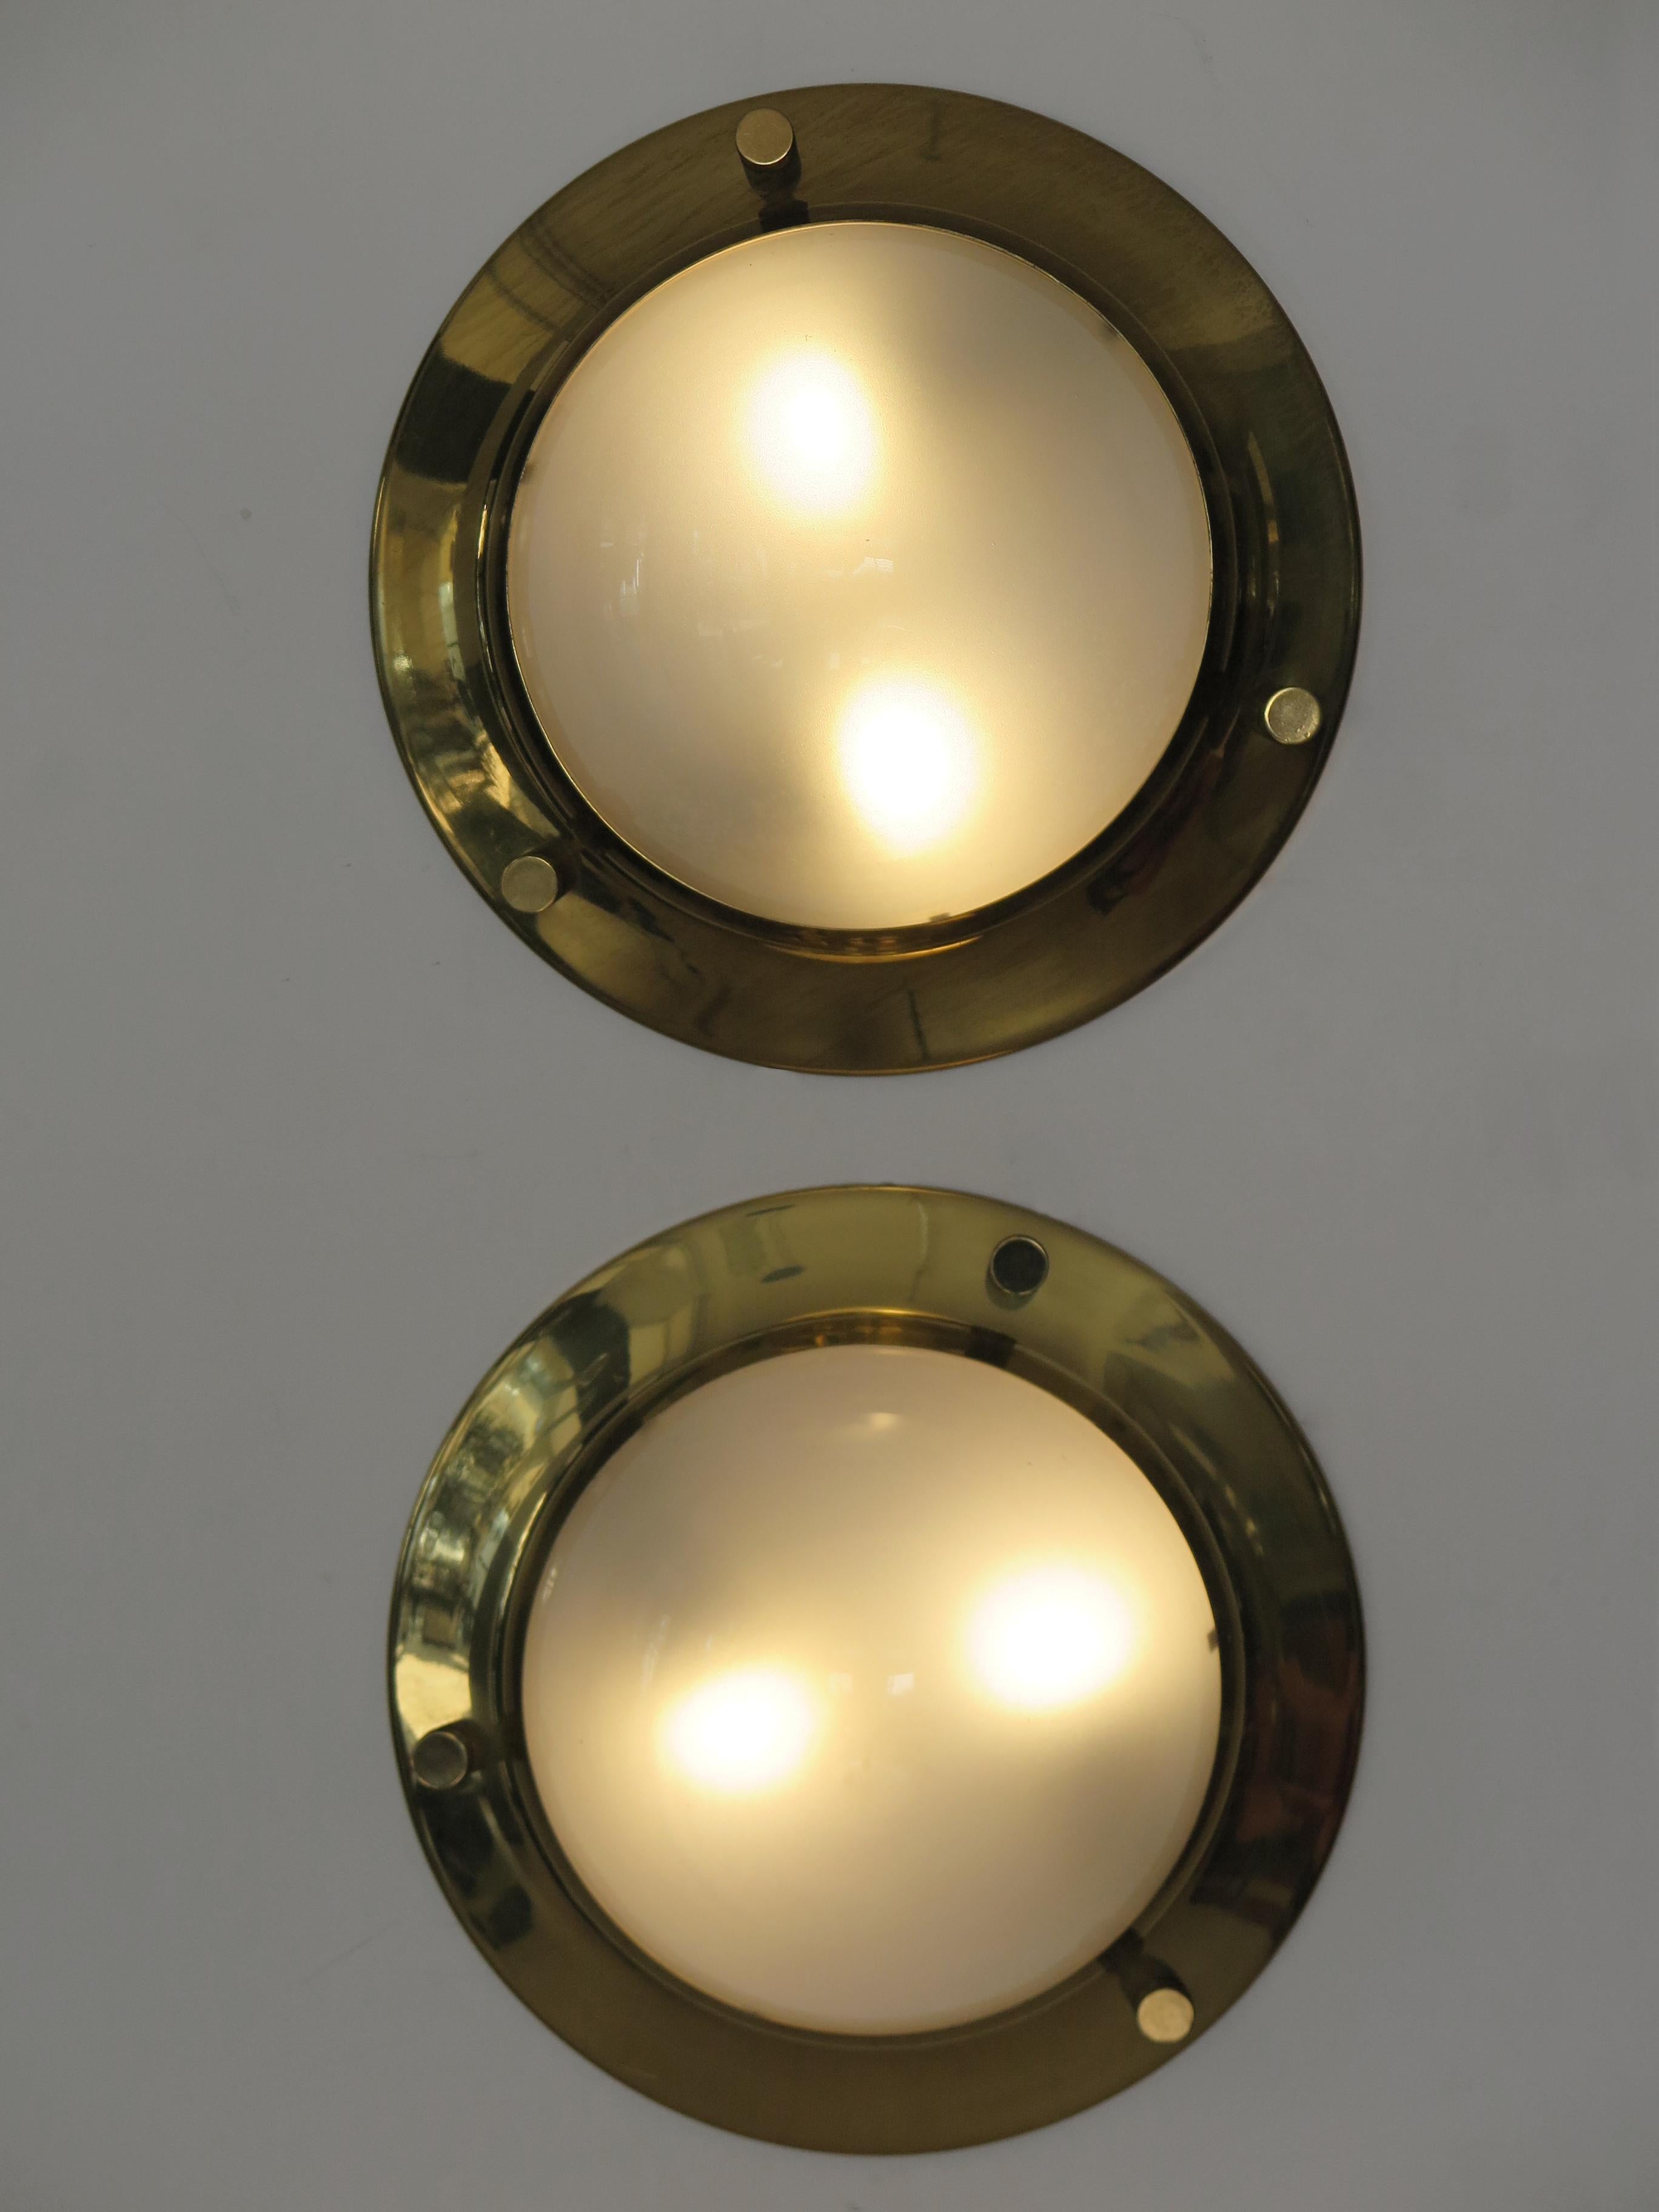 Italian Mid-Century Modern design set of two scones wall lamps or ceiling lamps model “LSP6 Tommy” large version designed by Luigi Caccia Dominioni (Milan 1913 - Milan 2016) and produced by Azucena from 1965 with polished brass frame and half-sphere